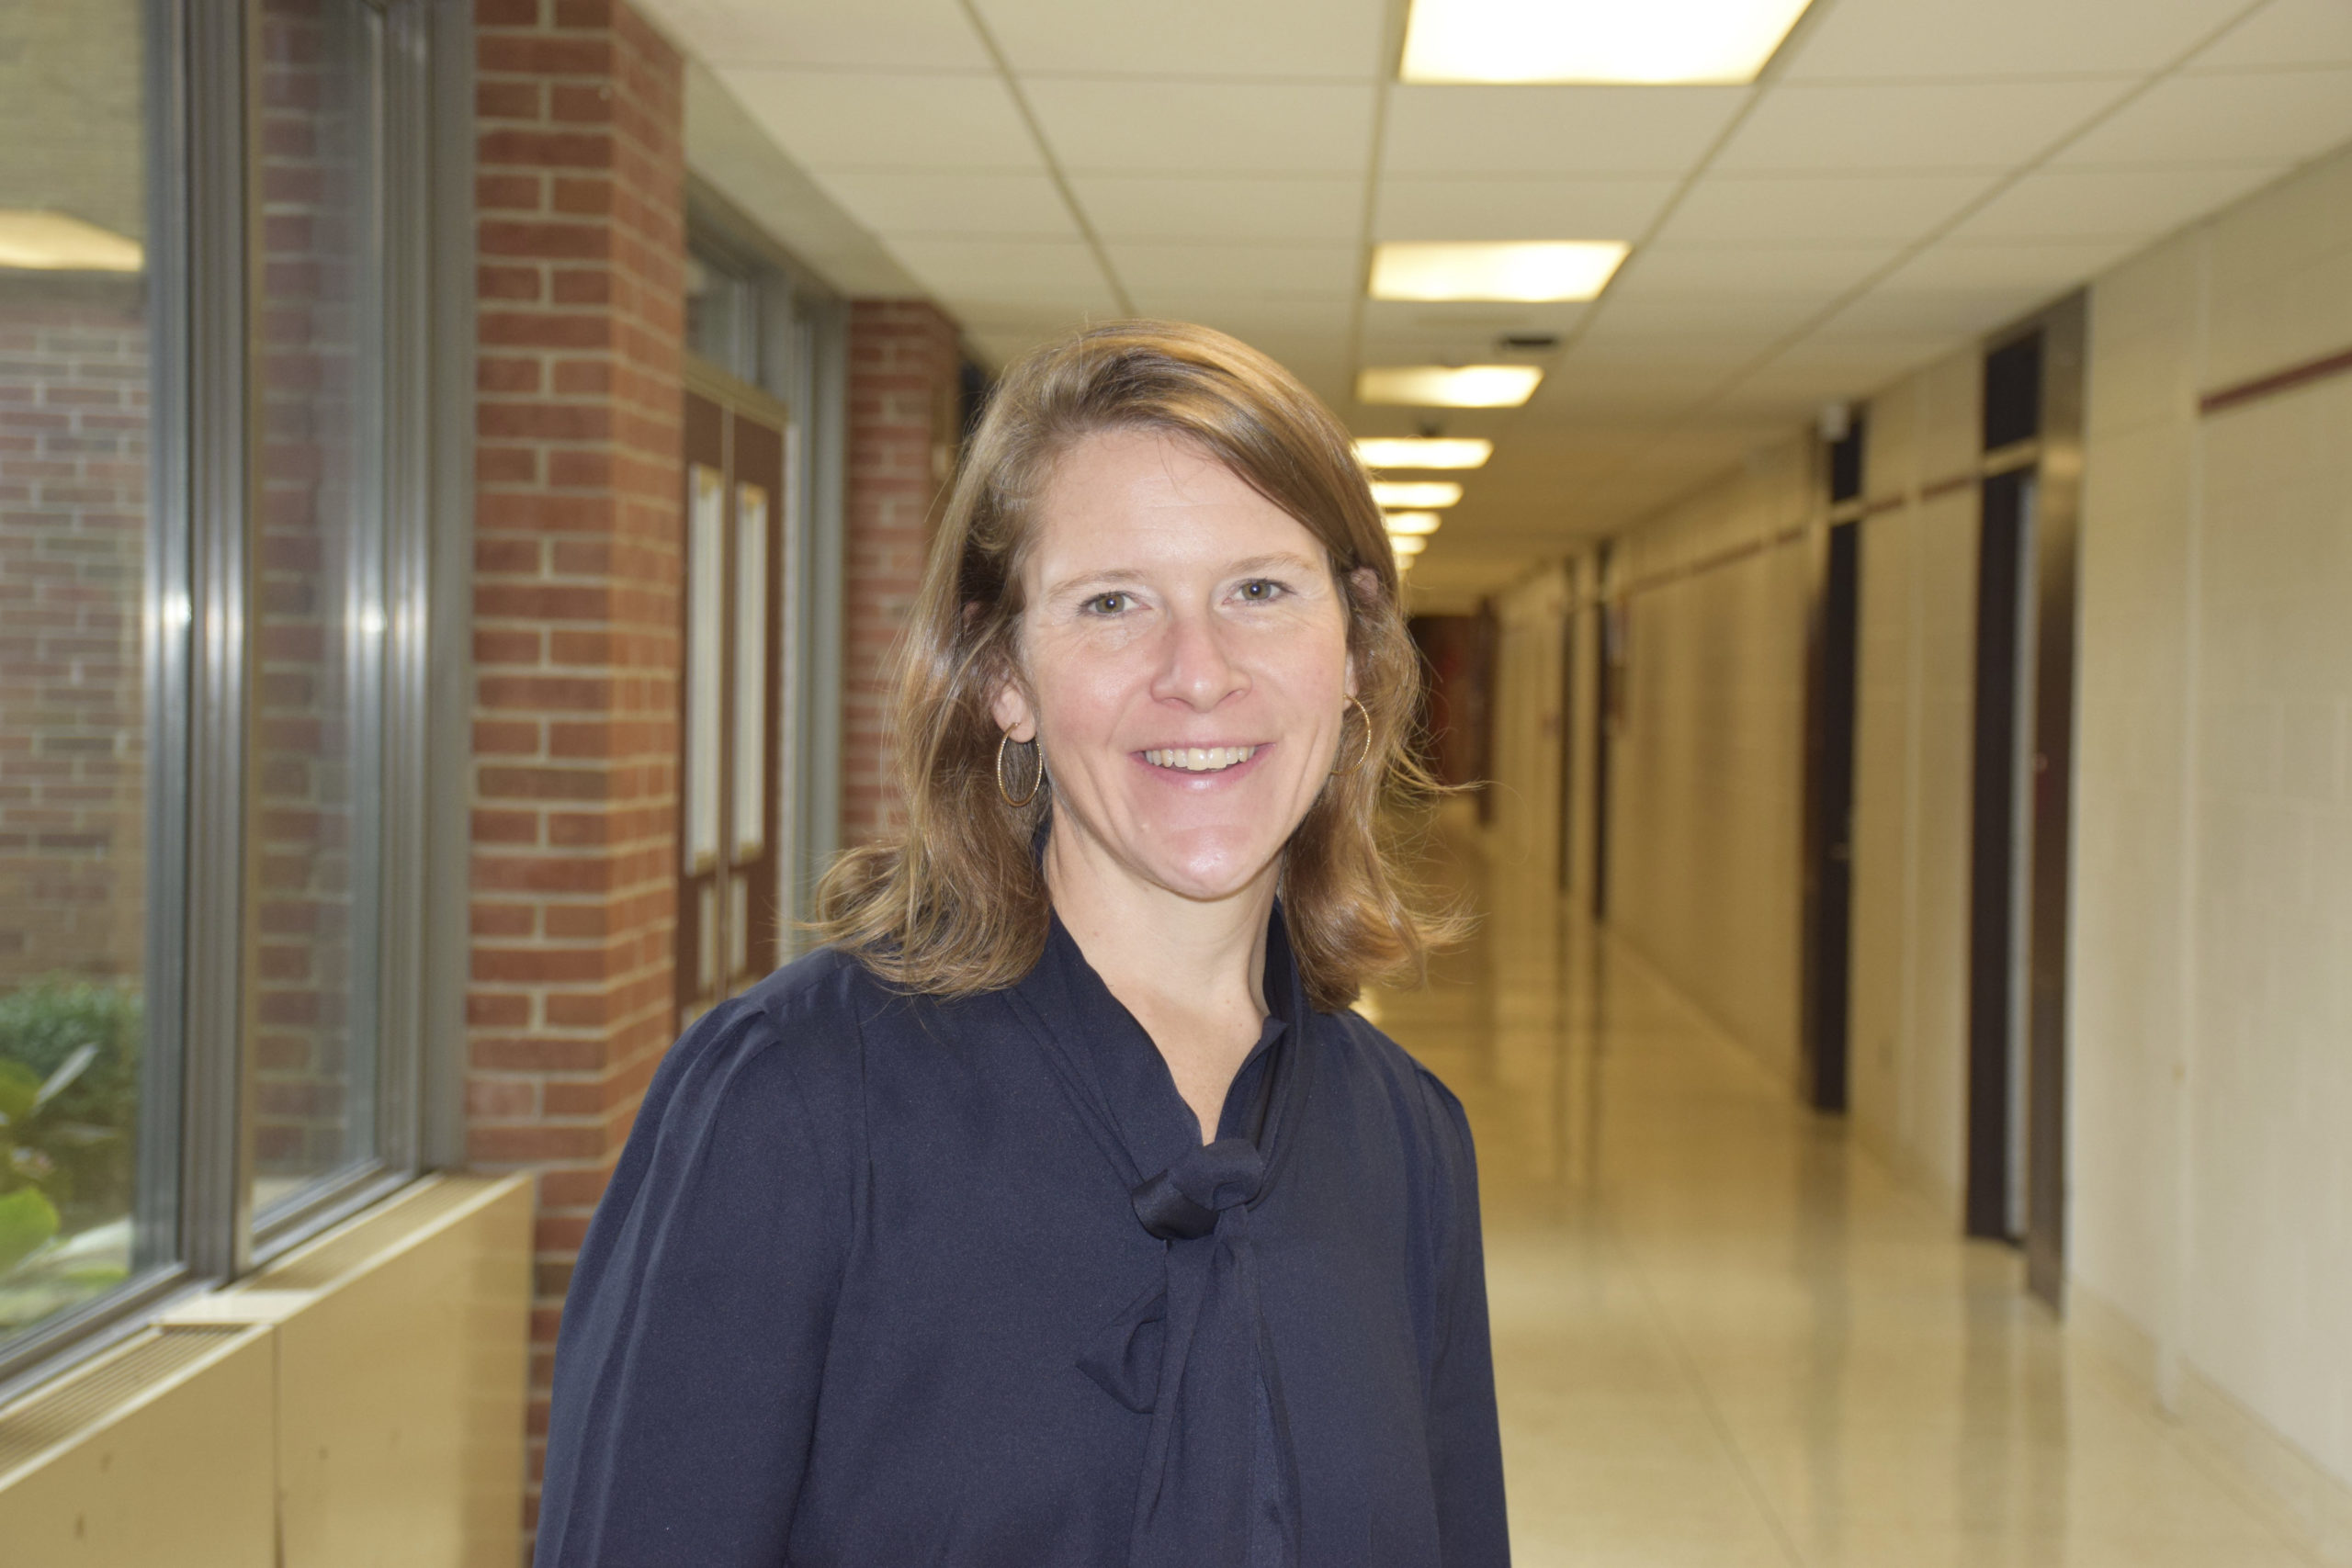 Sara Smith, a 14-year veteran of the district, is the new assistant principal at Southampton High School.